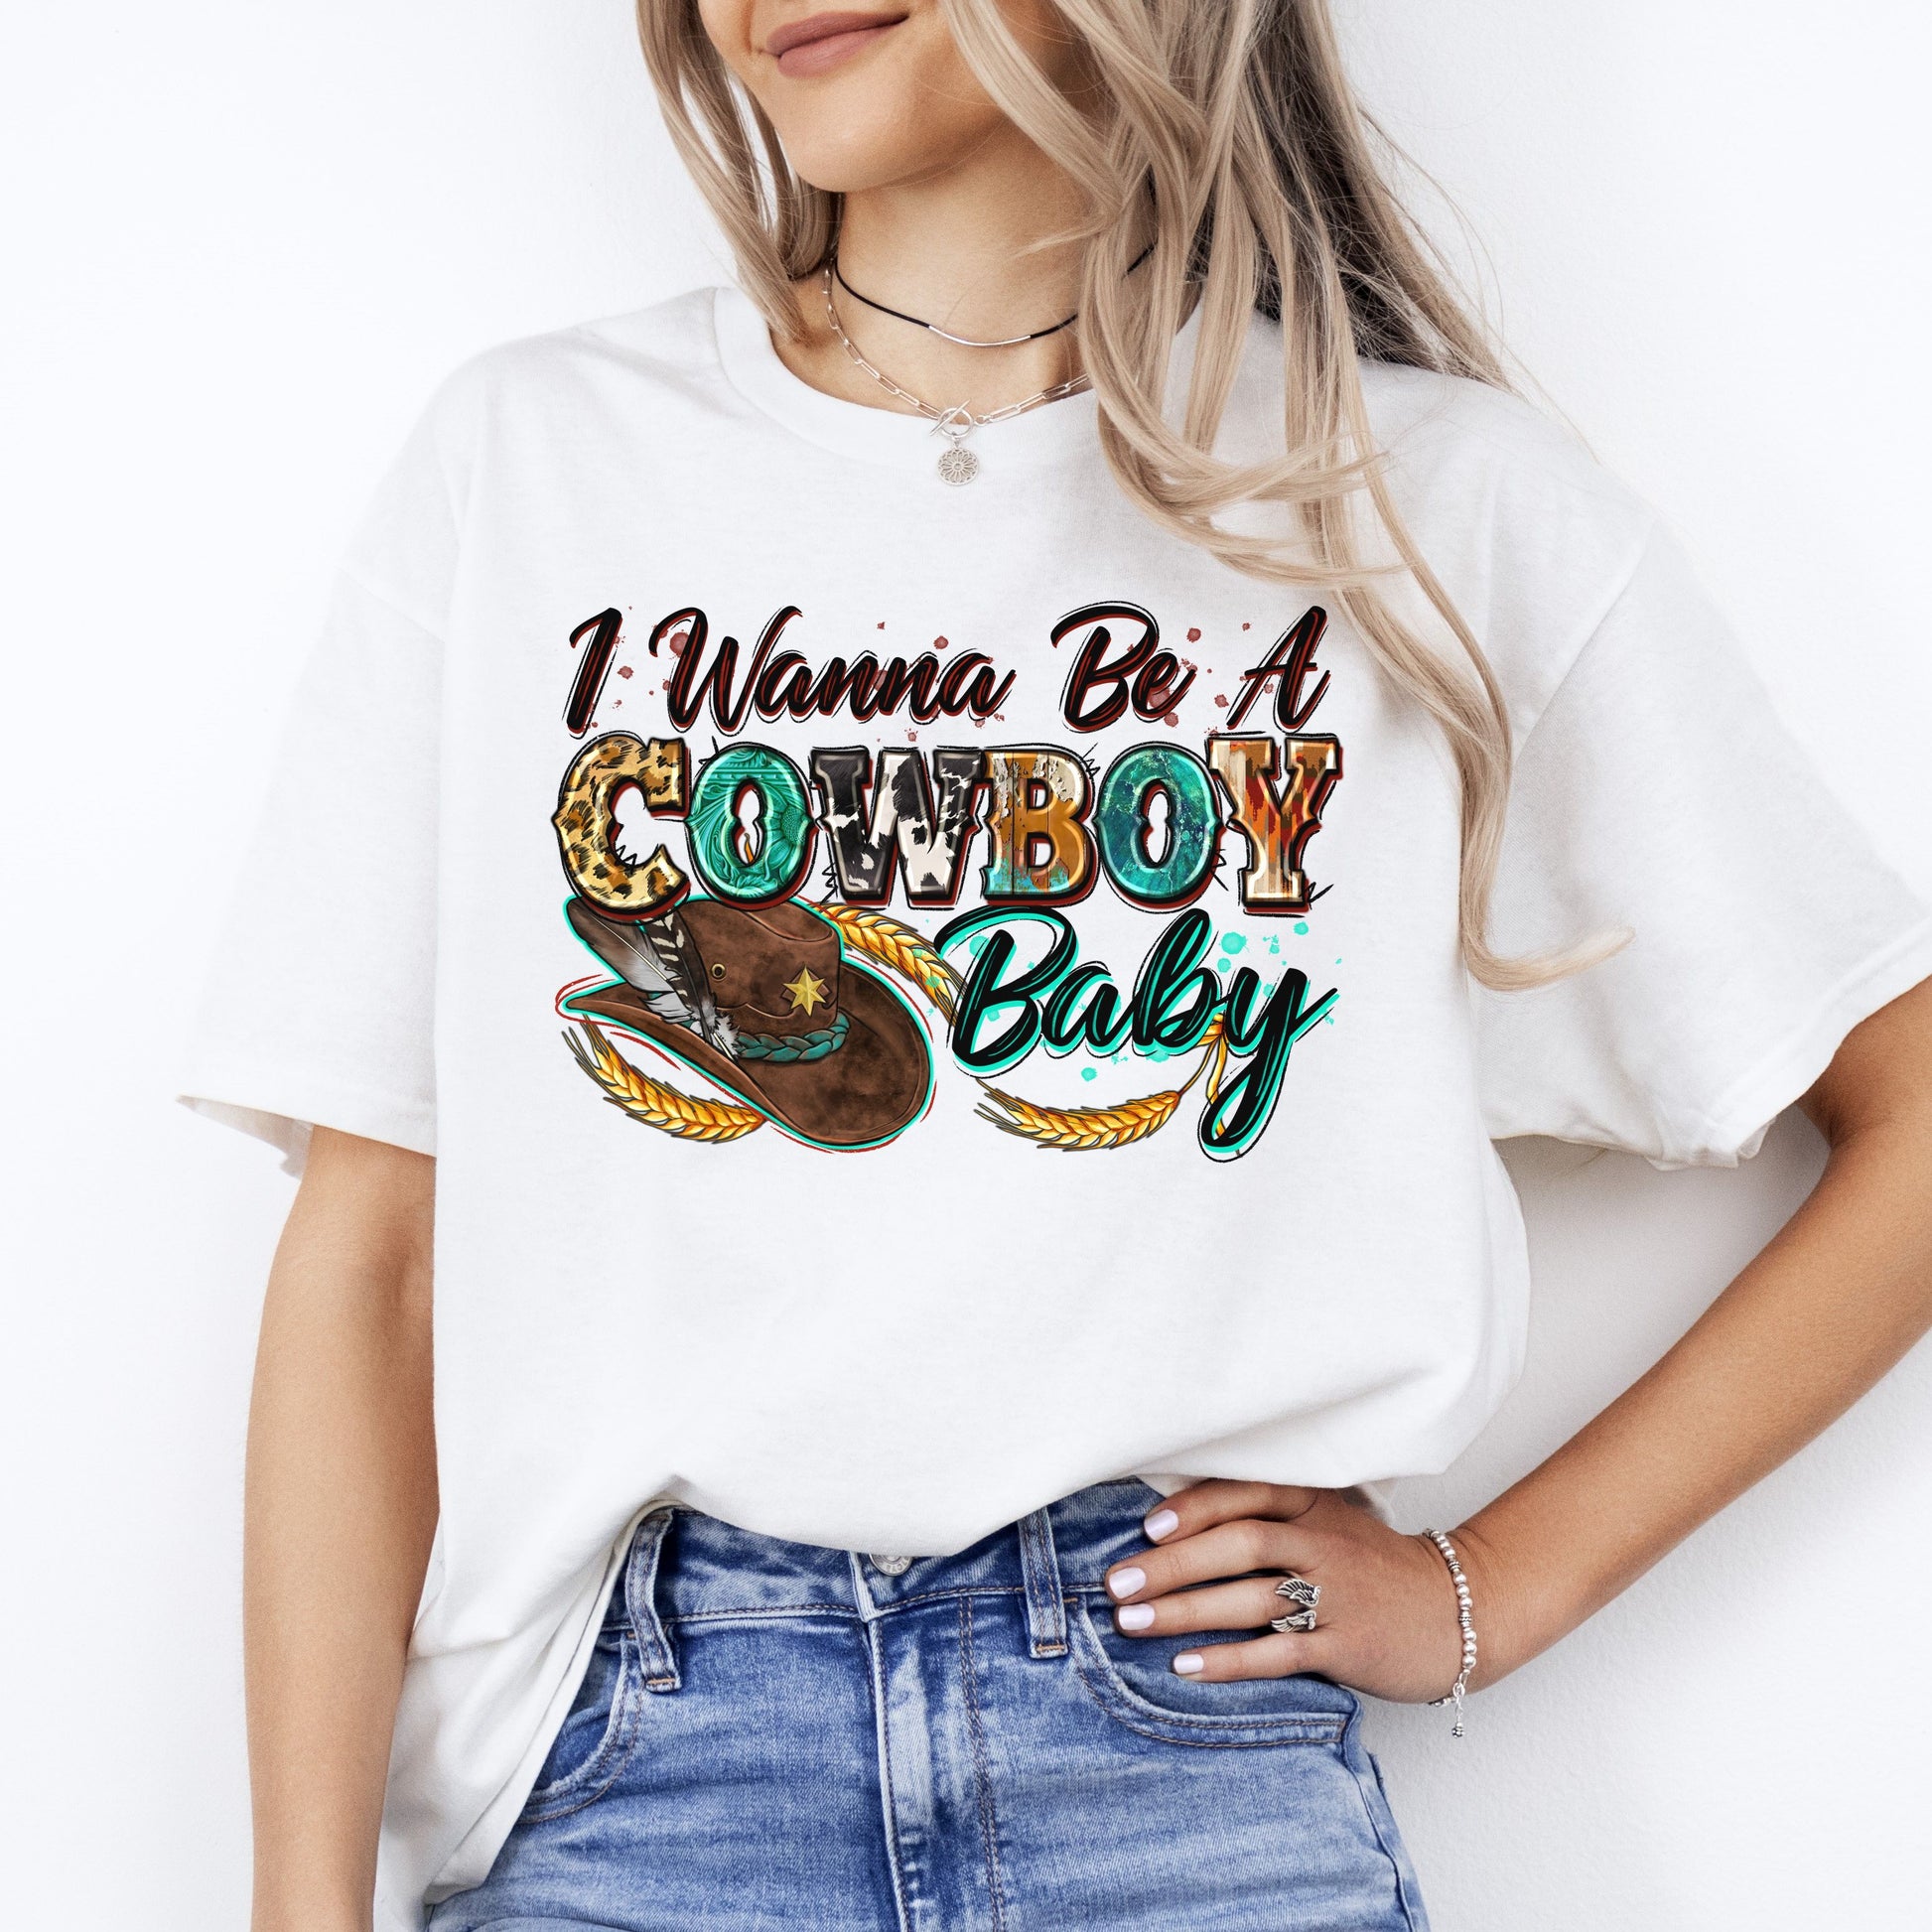 I wanna be a cowboy baby T-Shirt Cowboy girlfriend cowgirl Unisex Tee Sand White Sport Grey-White-Family-Gift-Planet